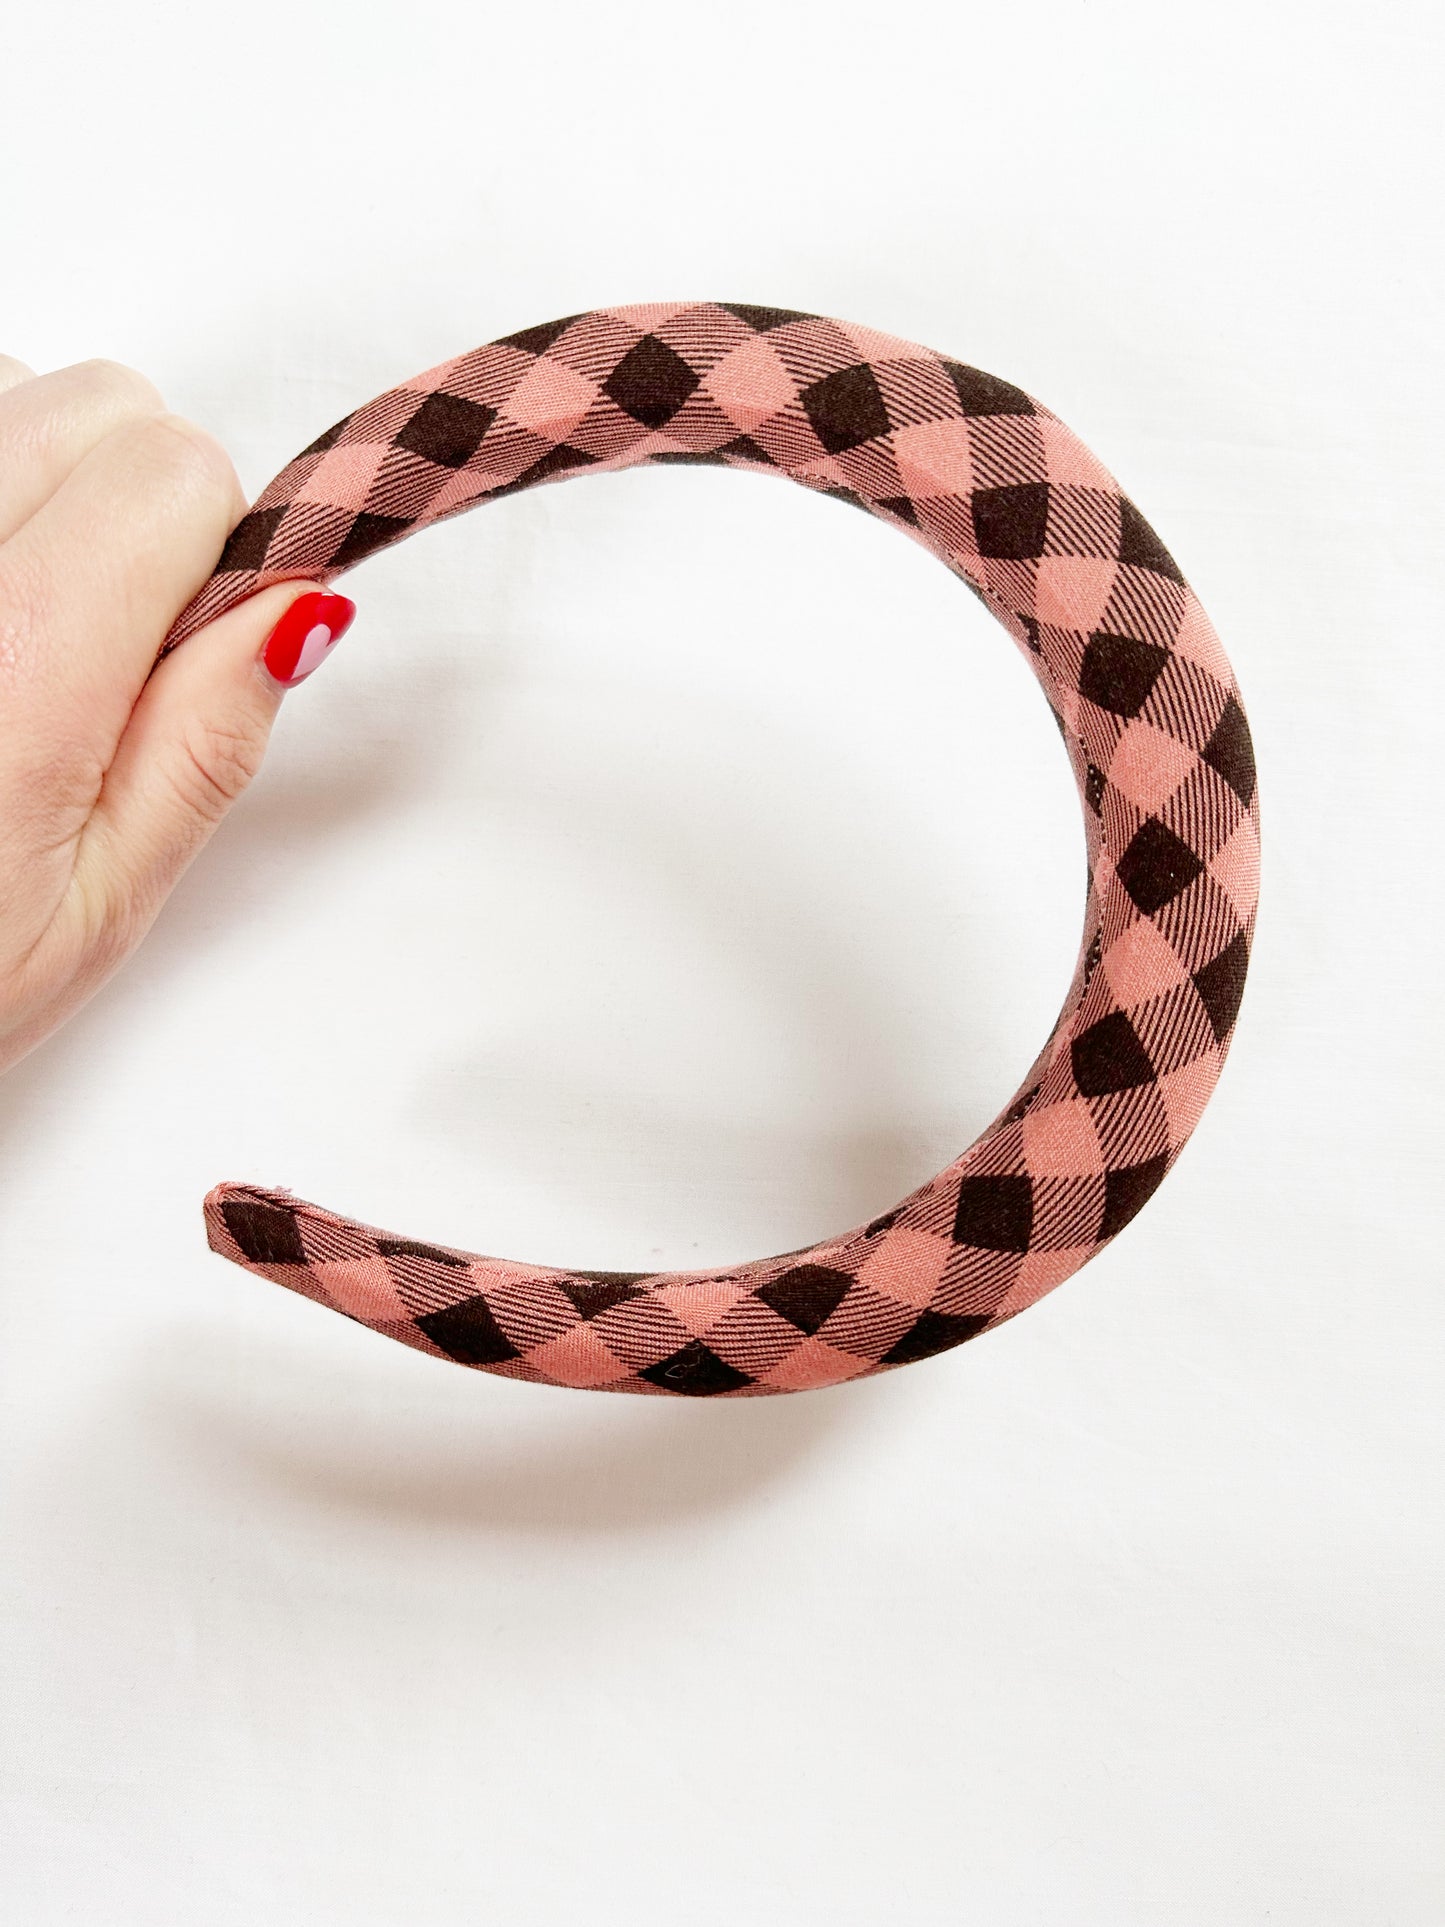 Padded Headband in pink and brown gingham